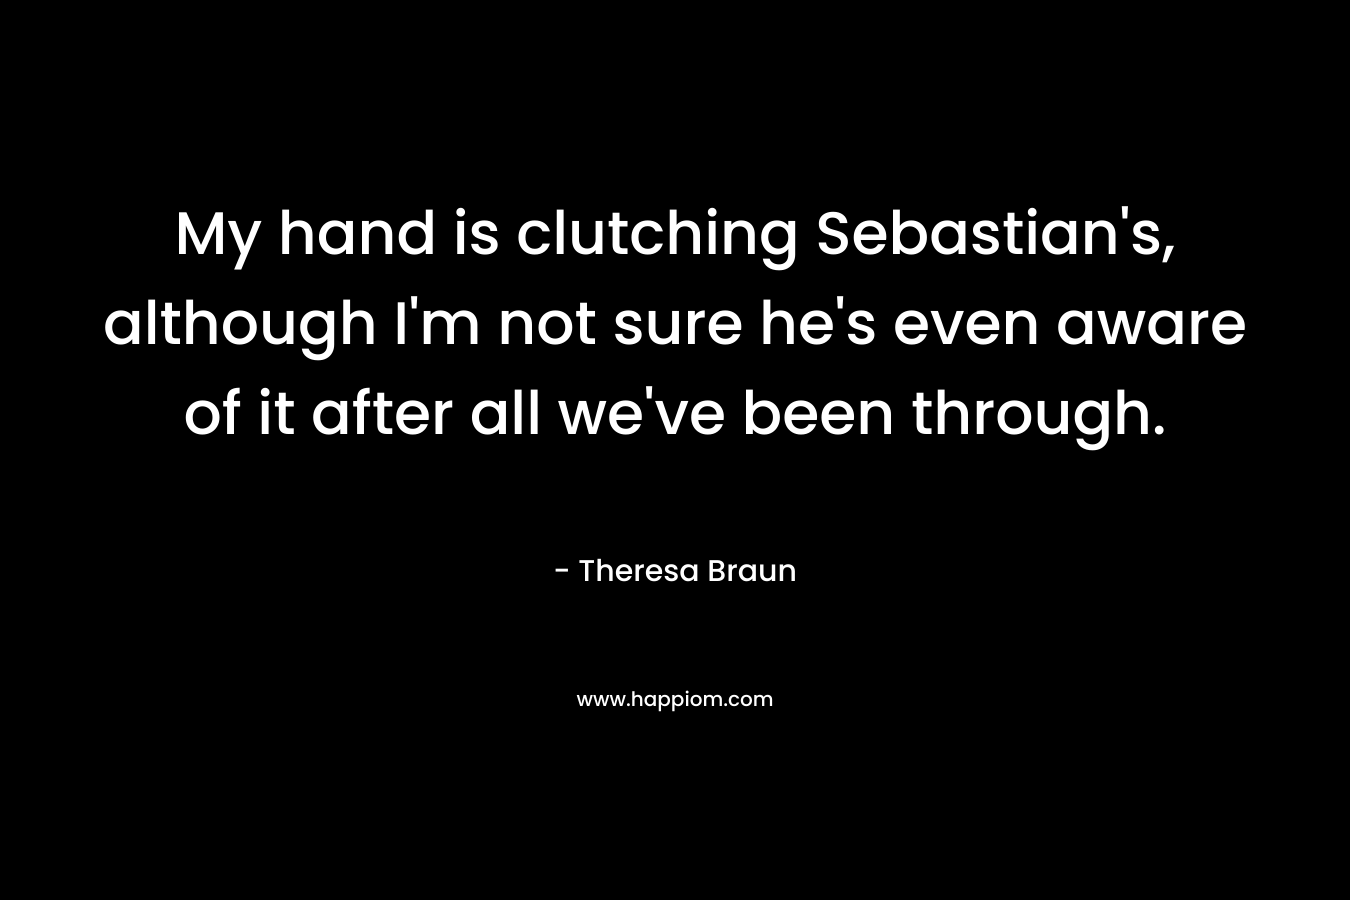 My hand is clutching Sebastian’s, although I’m not sure he’s even aware of it after all we’ve been through. – Theresa Braun